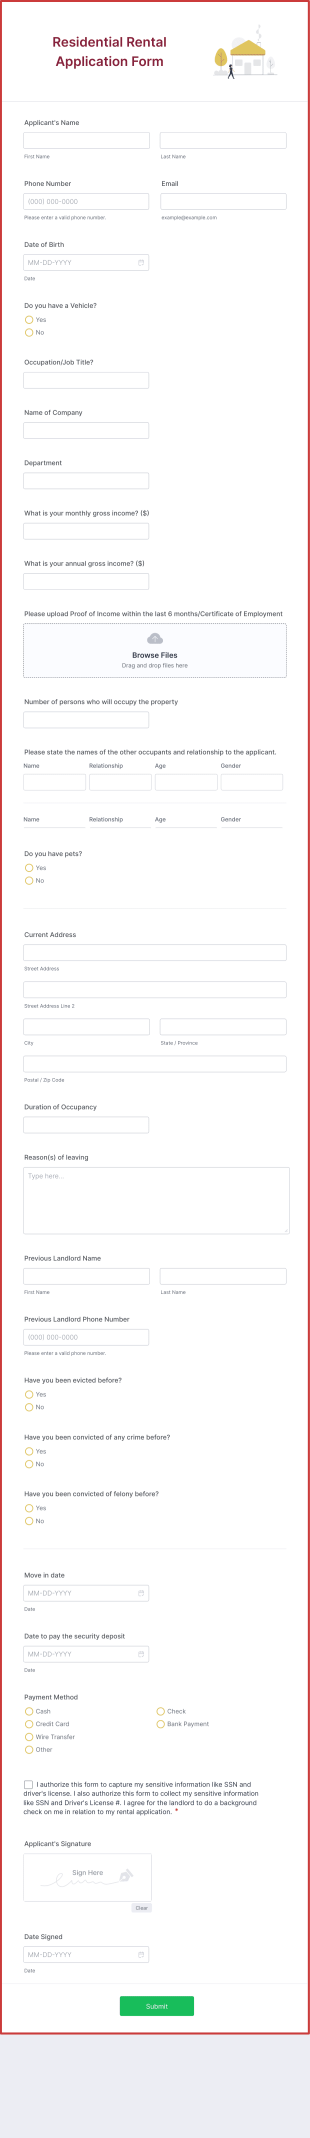 Residential Rental Application Form Template